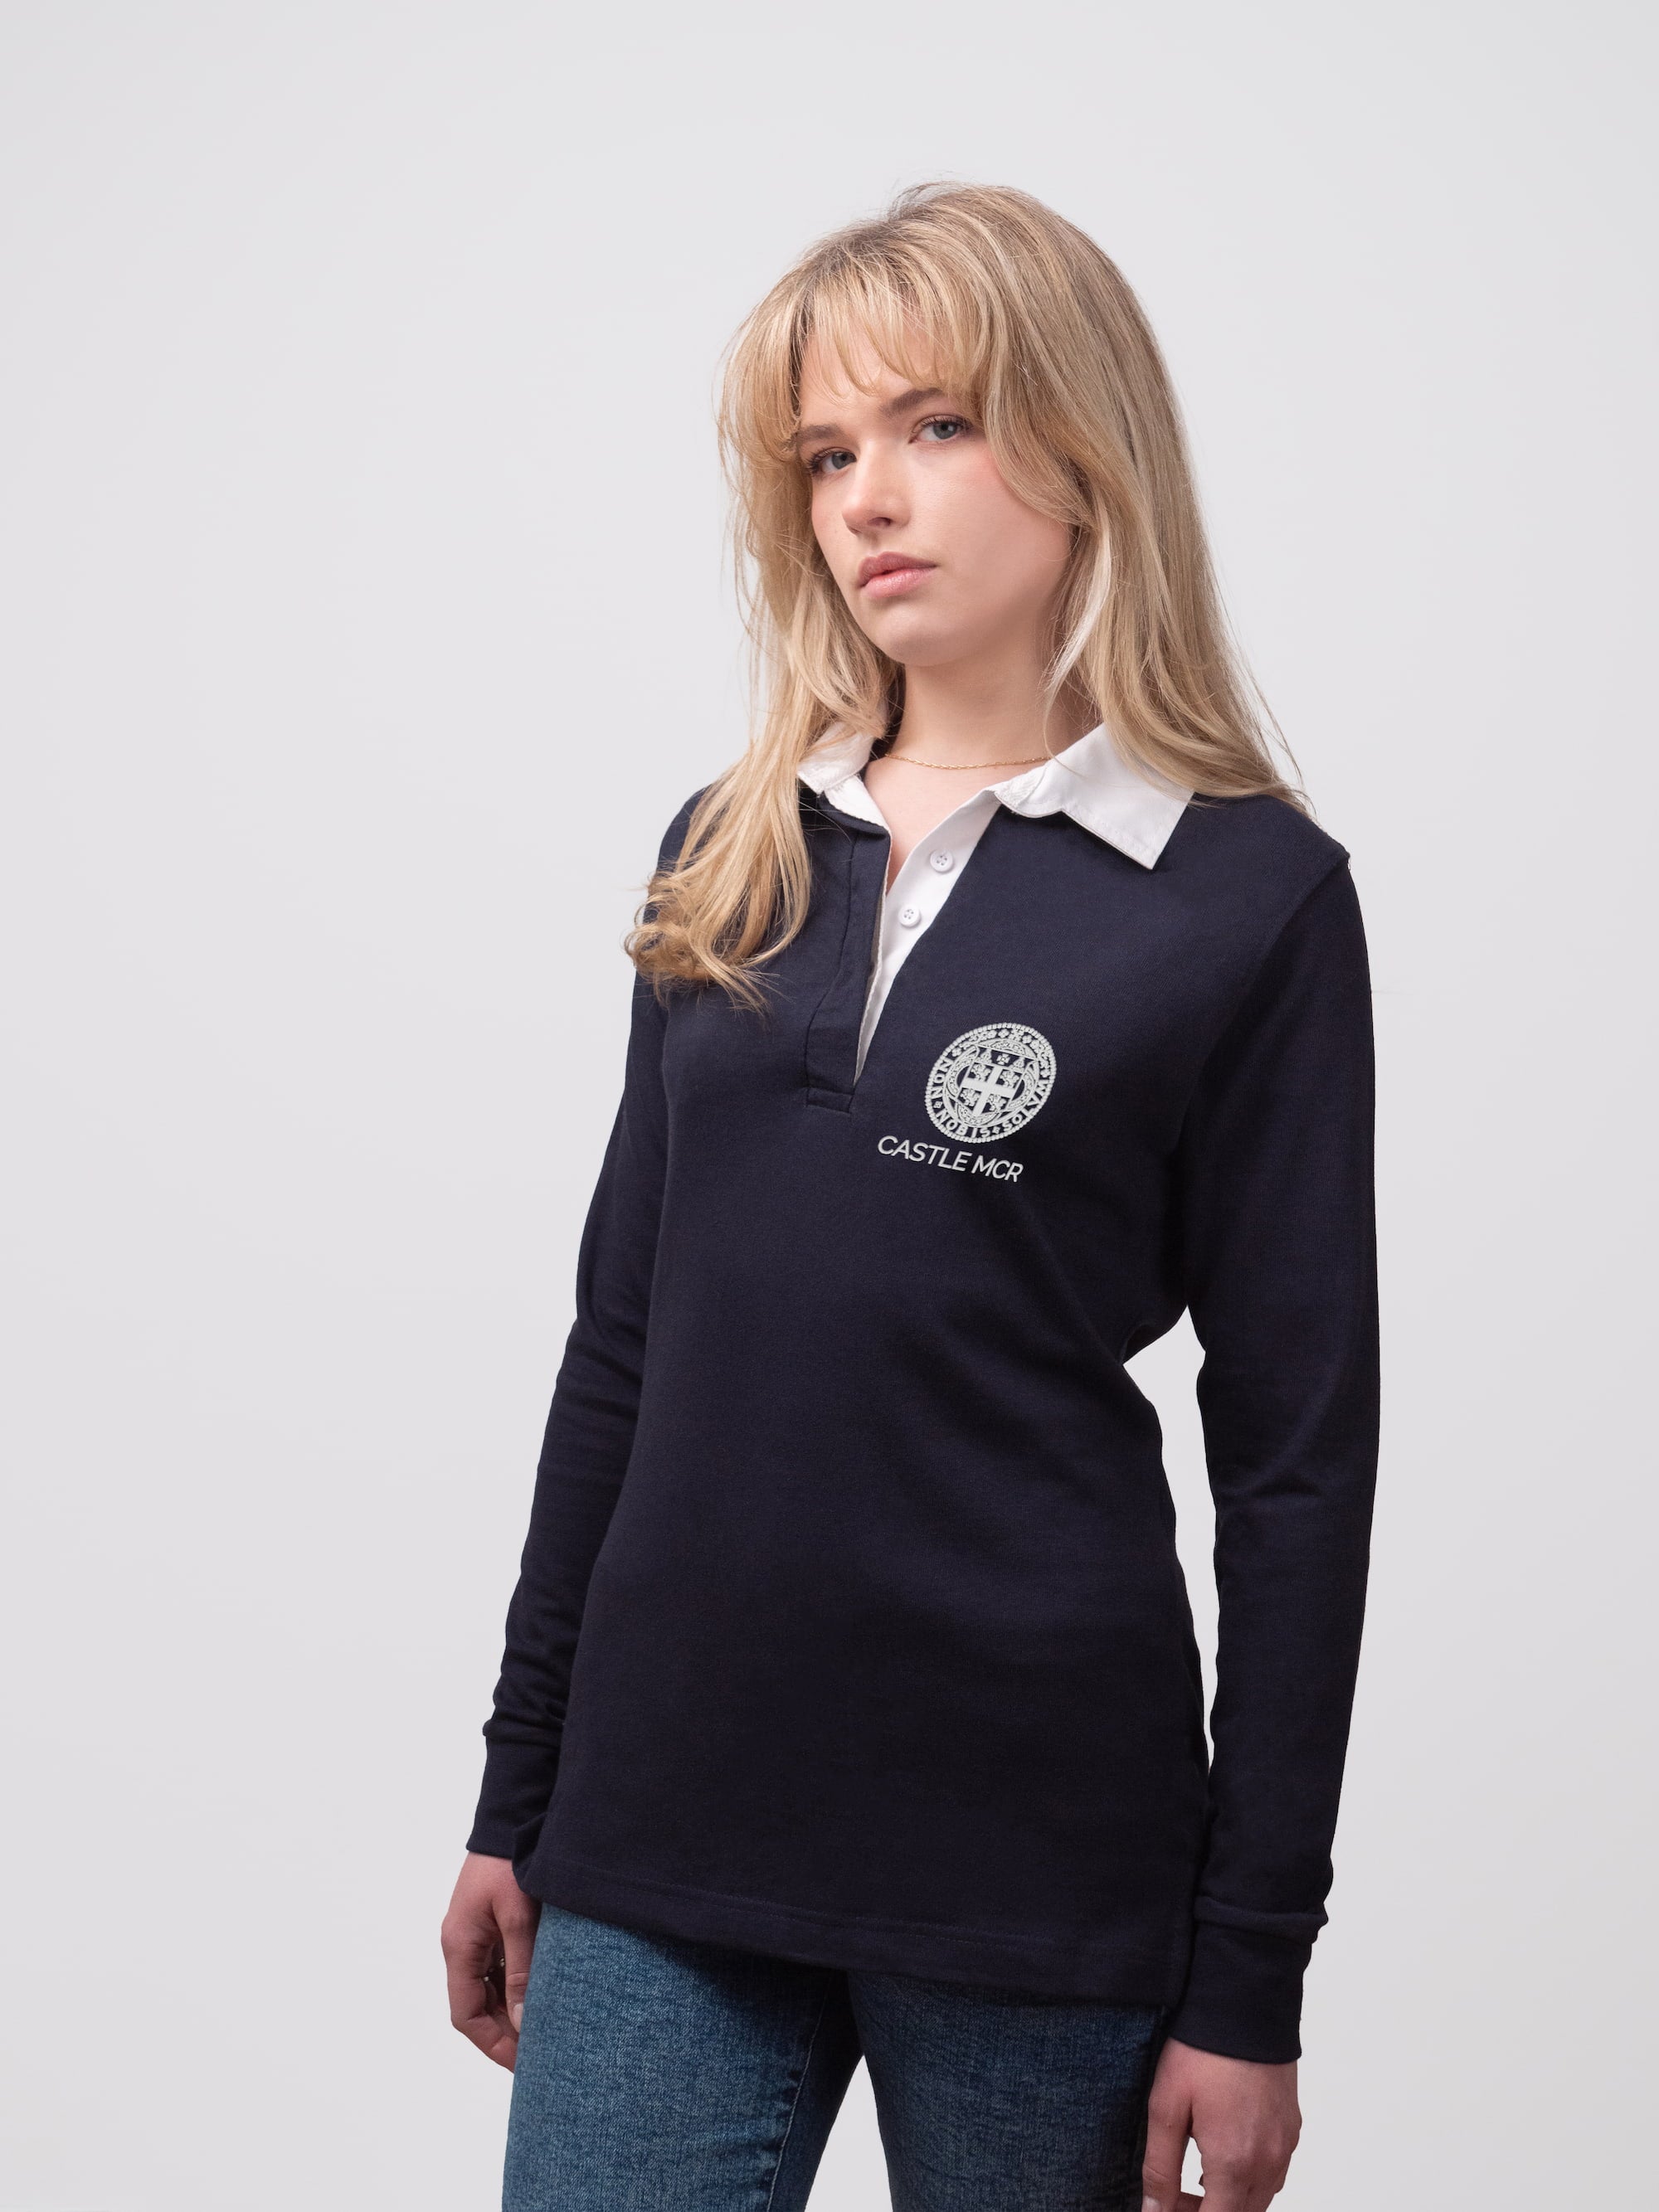 Student wearing a navy Castle MCR College rugby shirt with embroidered crest